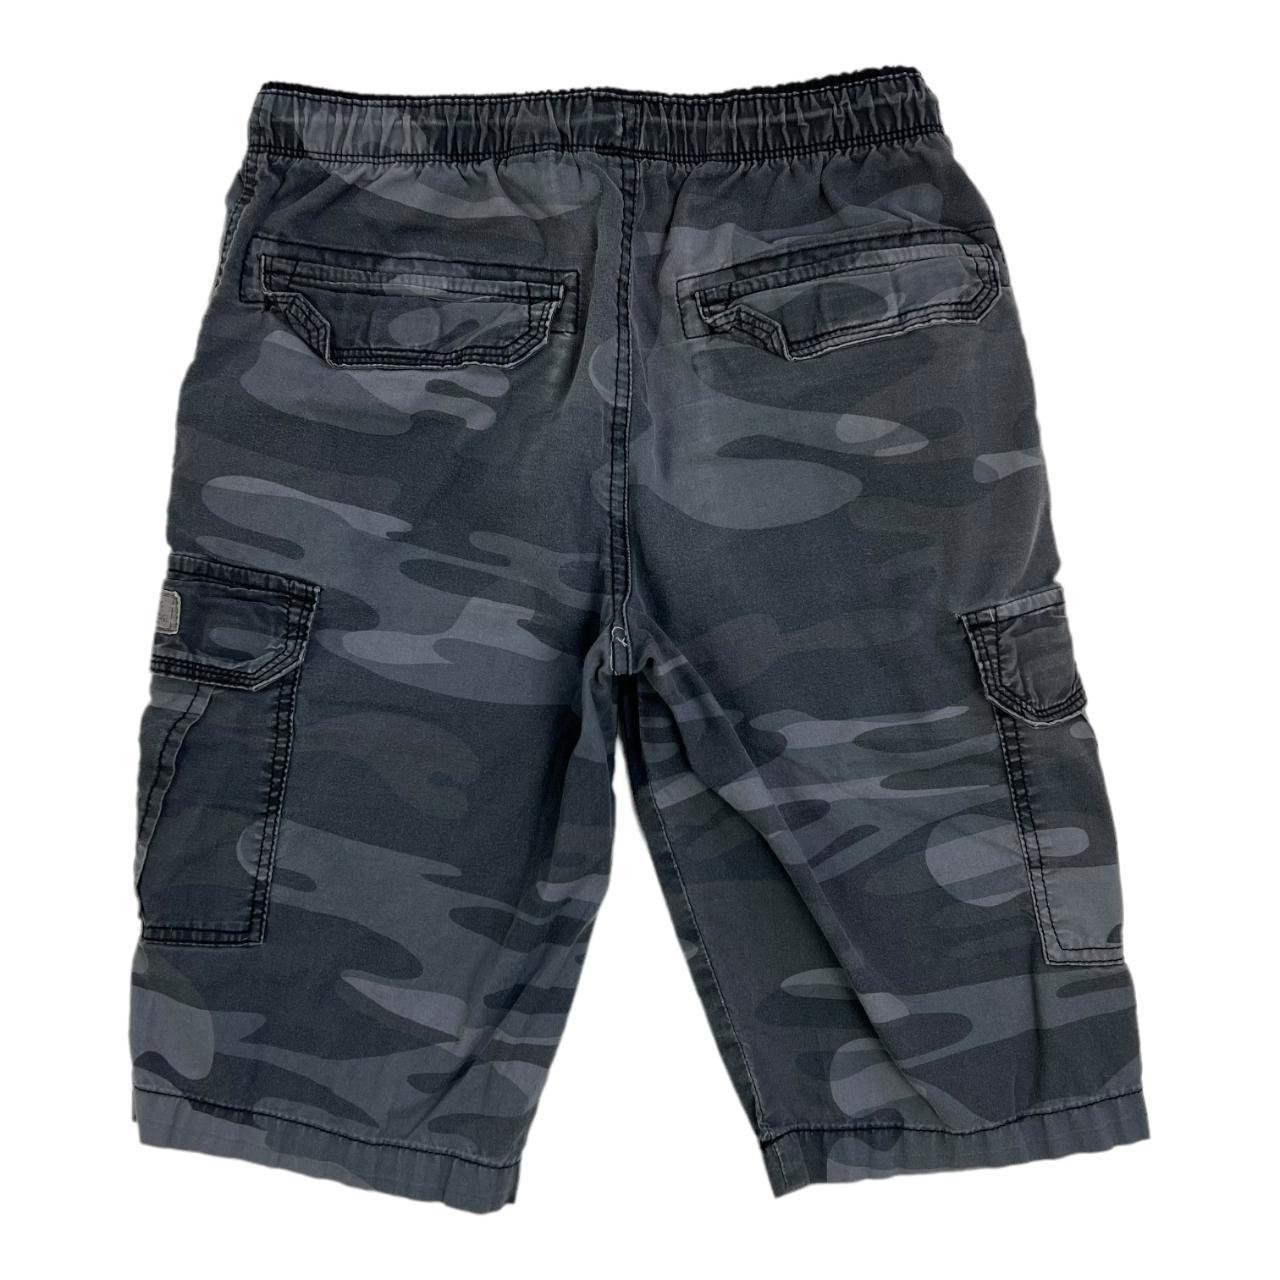 Product Image 2 - Camo Tactical Cargo Shorts

A pair